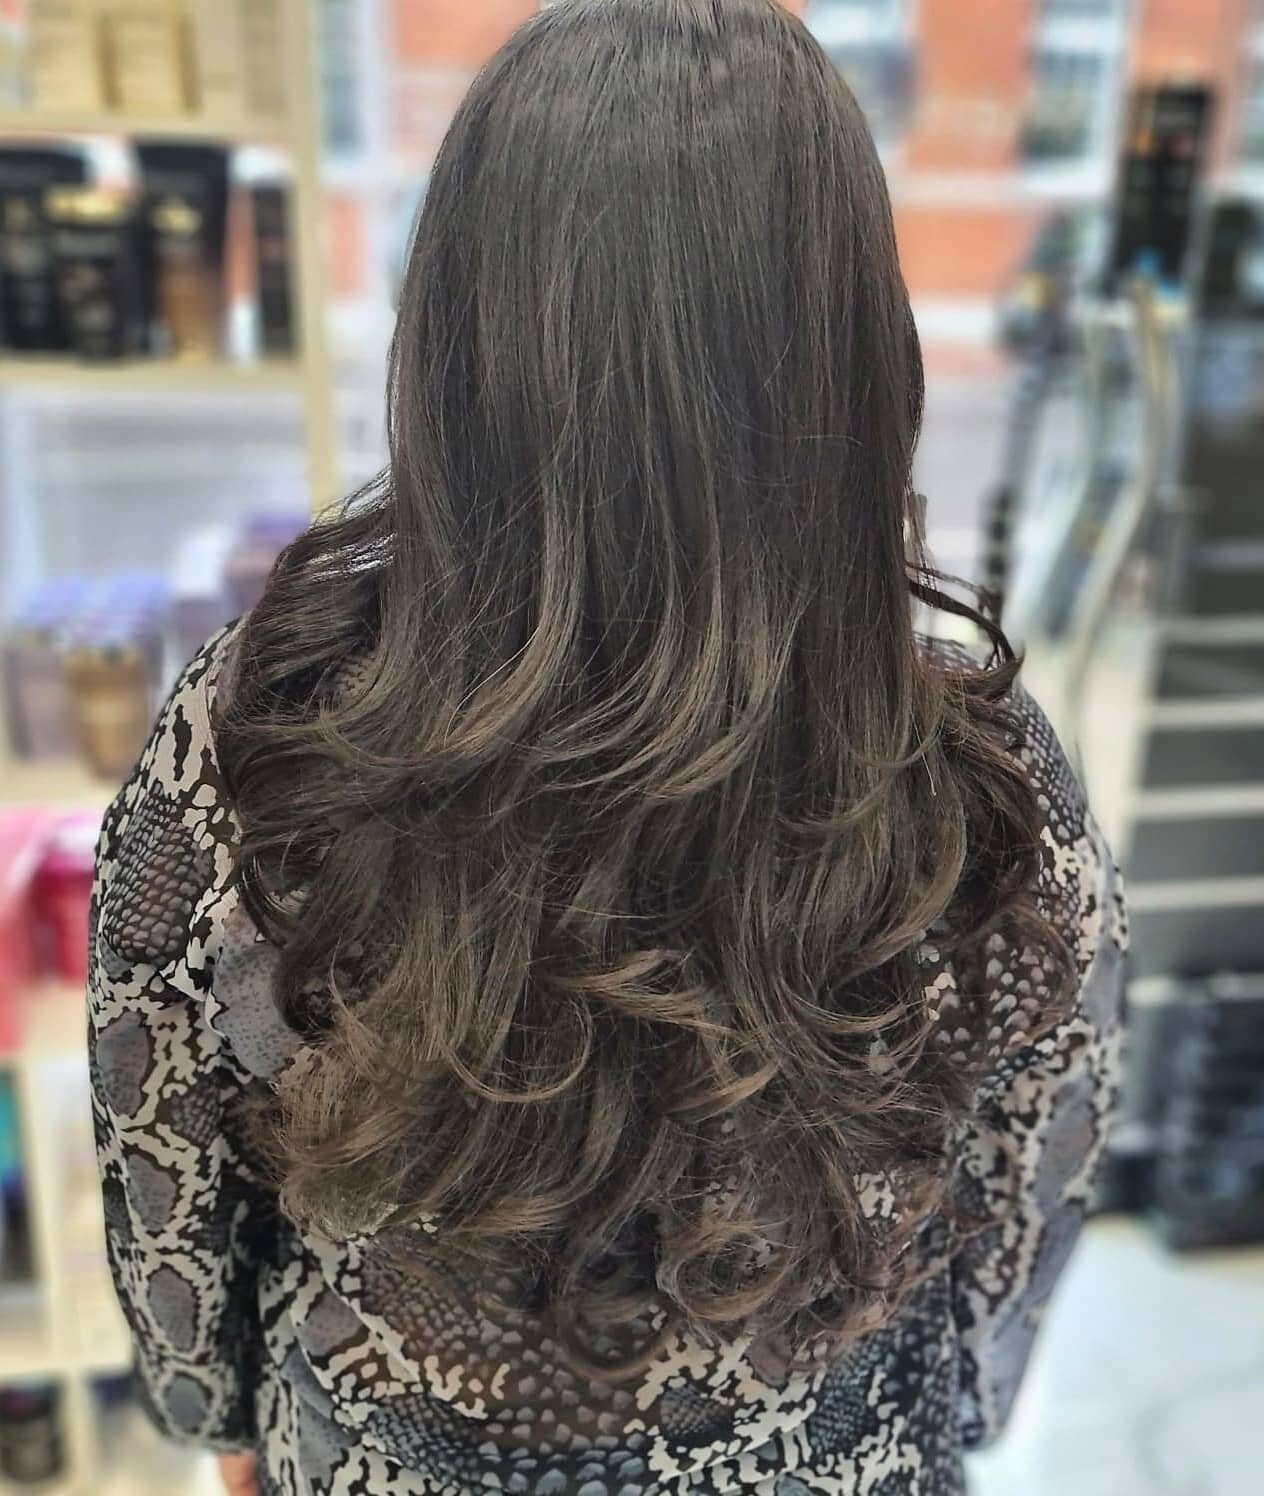 Thank you @Jalam84 for letting us show your beautiful hair off. 
Black is always elegant! 
Stunning #loosewaves perfect to show off now that we are free to go back out! 
Using #oliviagardenbrushes to create that big, beautiful curl.
.
.
.
.
.
#hairst